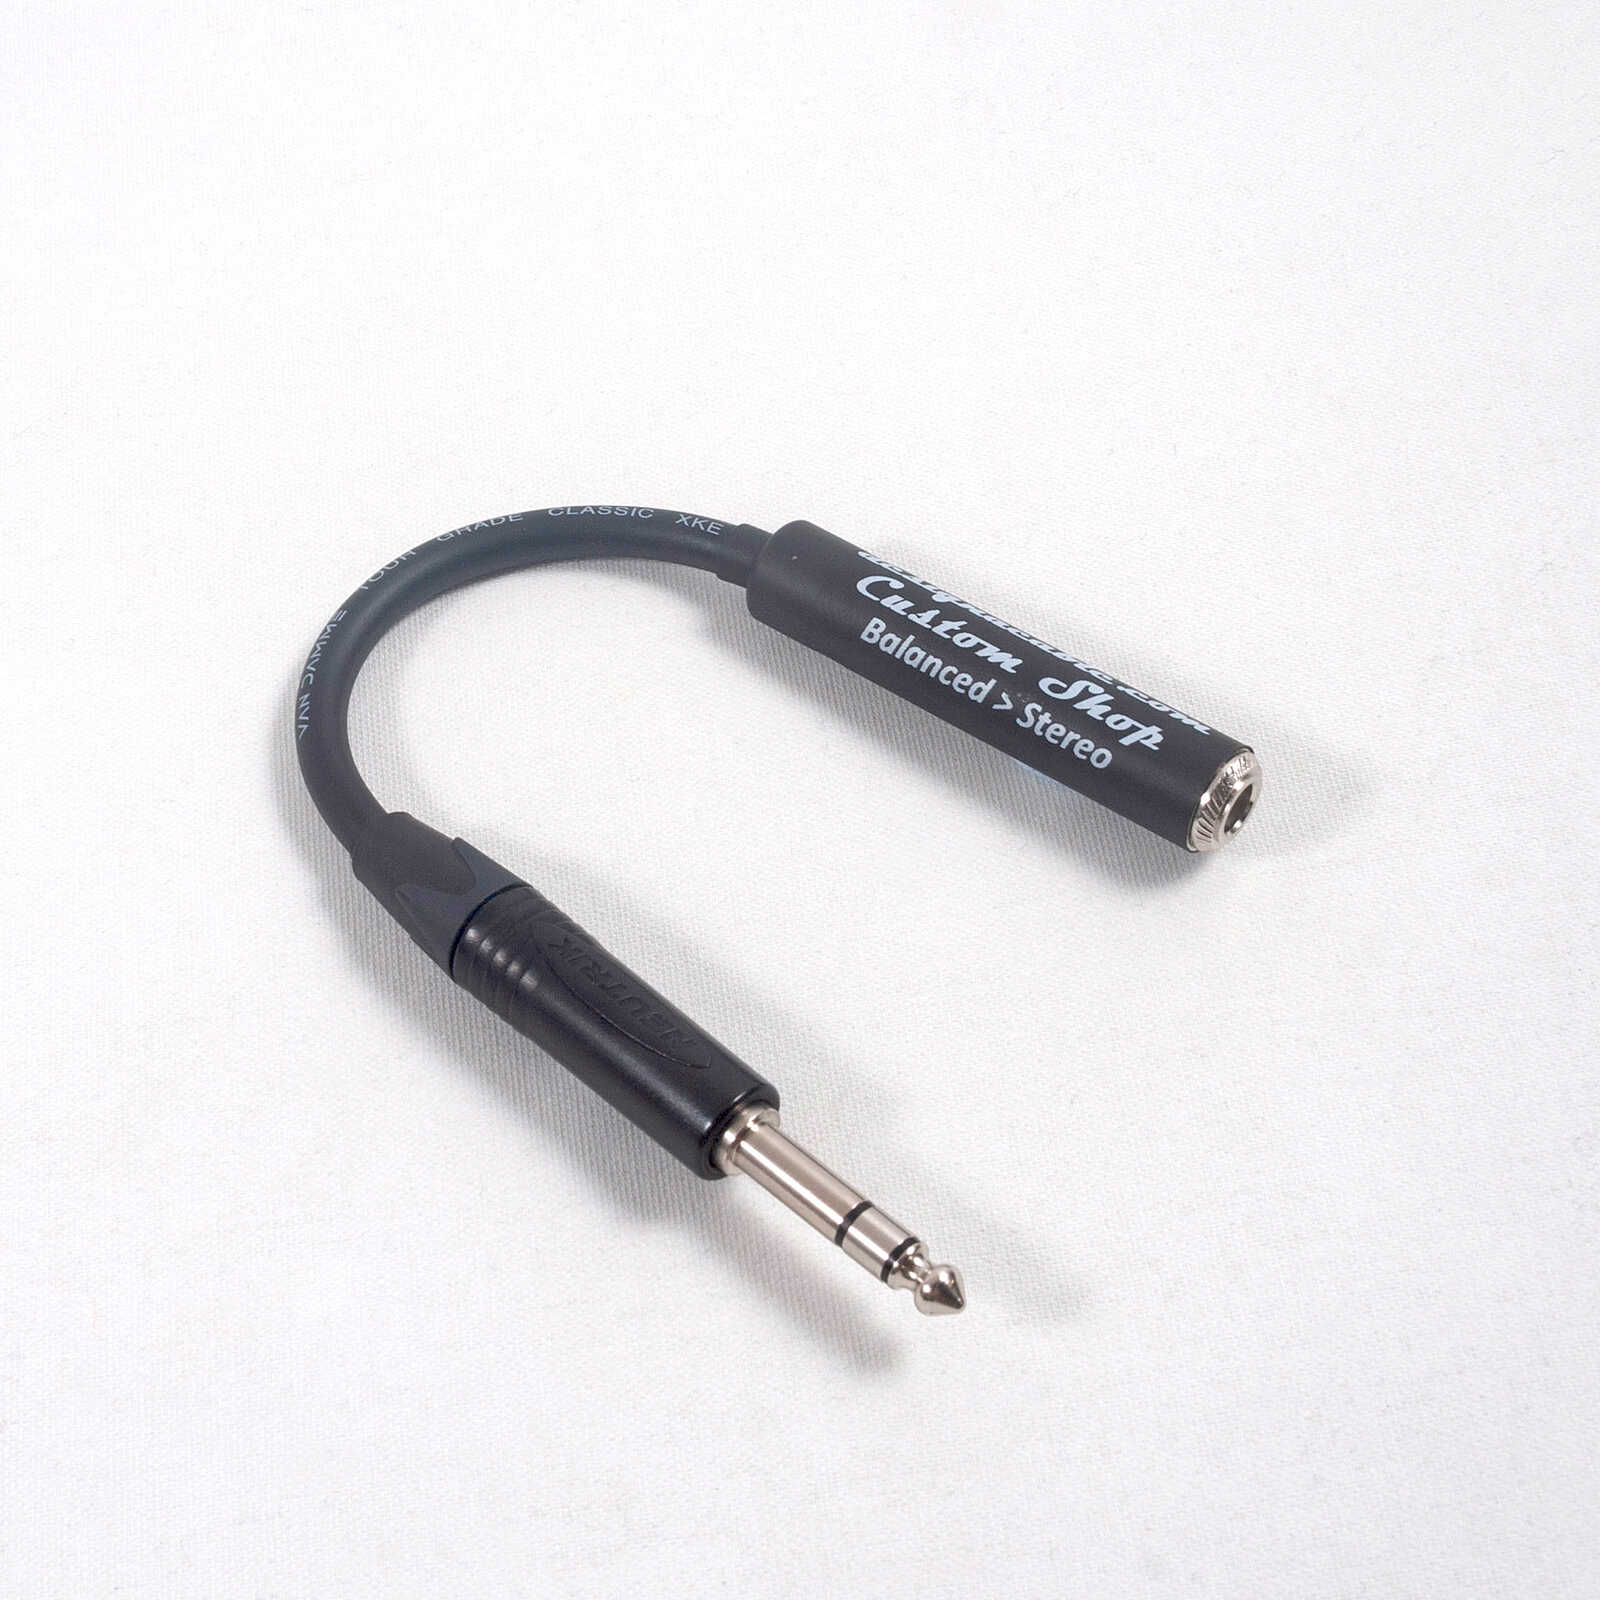 Van Damme IEM Extension Lead. IN-EAR MONITORING Cable. Stereo Headphone Jack